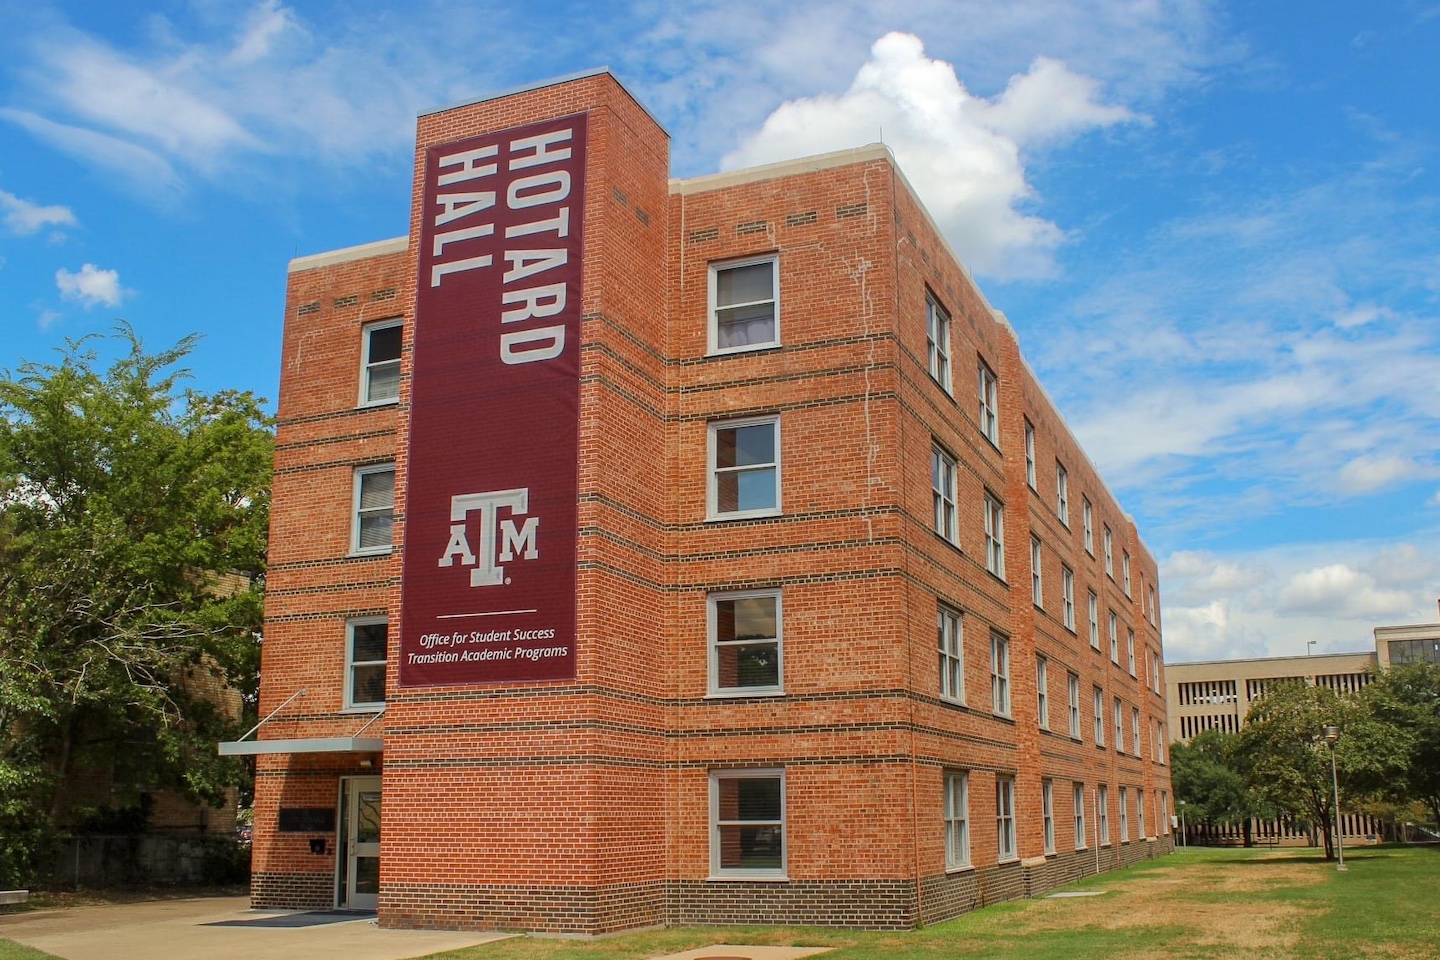 I Transferred to Texas A&M. Now What?